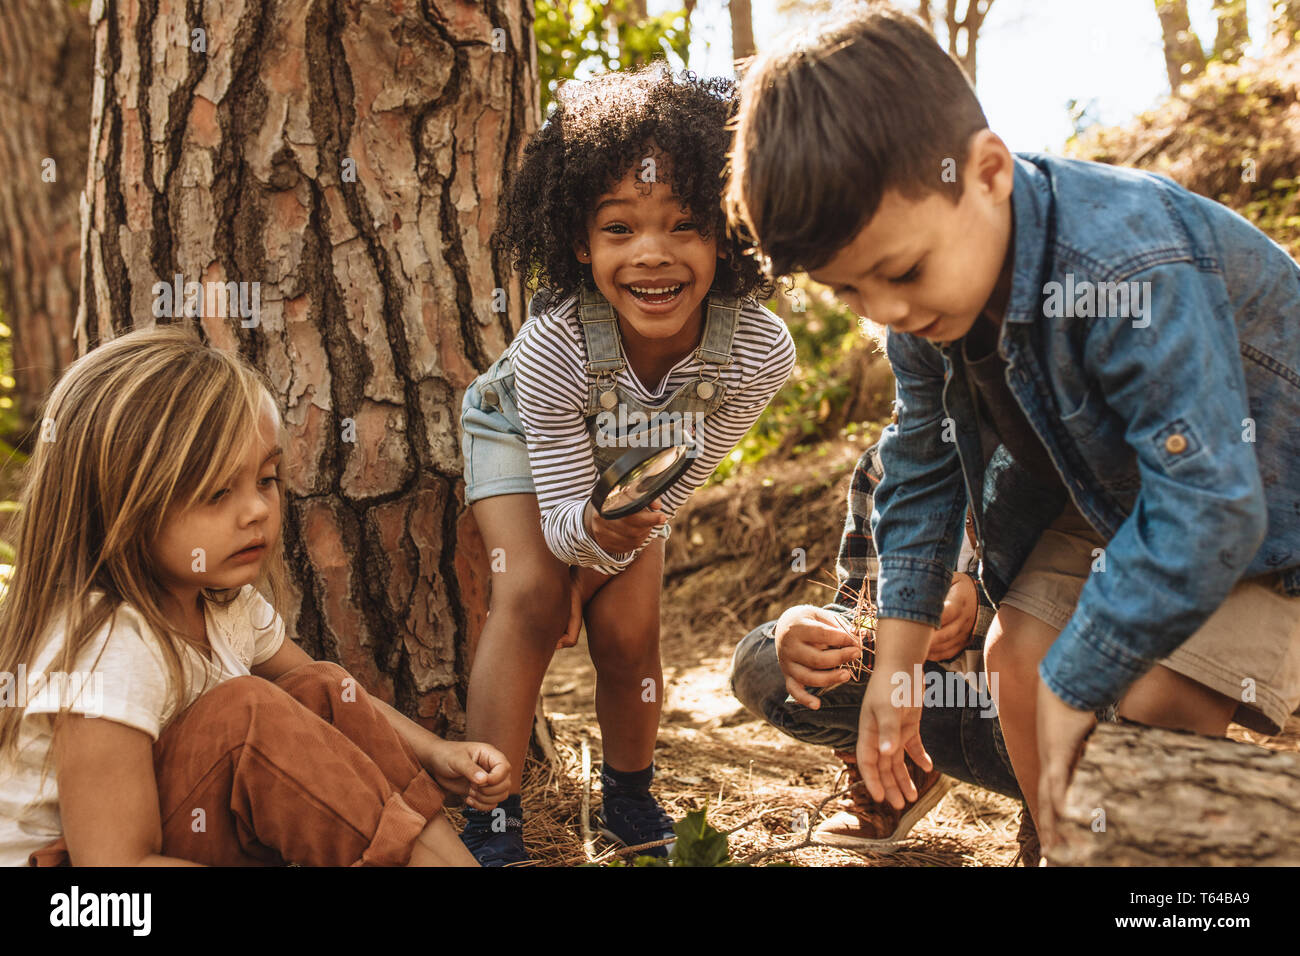 Cute kids with magnifying glass outdoors. Children playing in forest with magnifying glass. Stock Photo